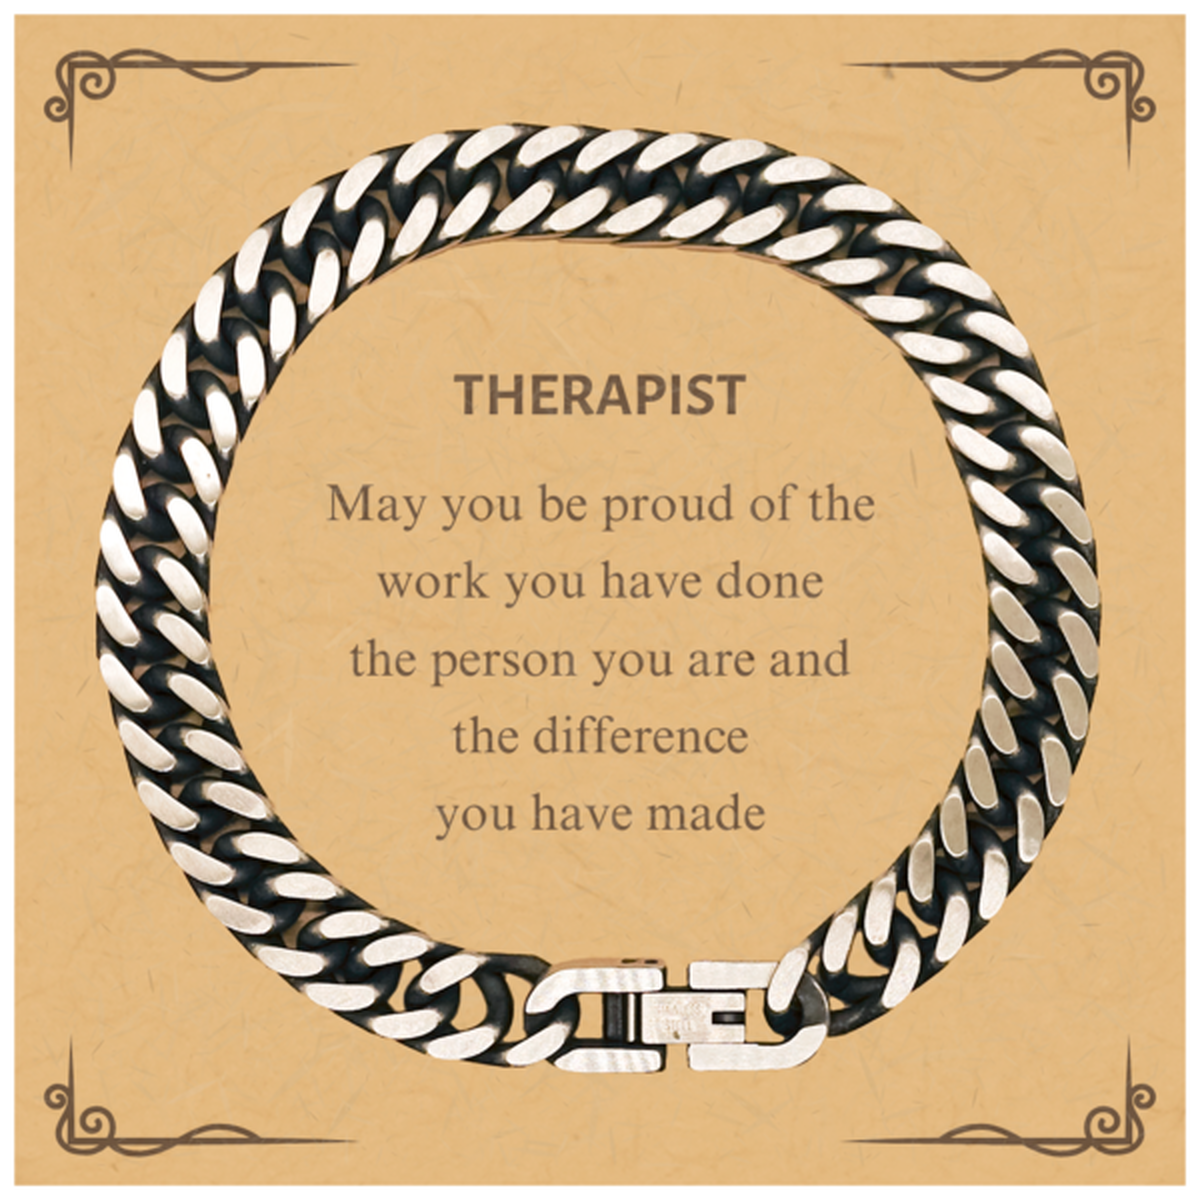 Therapist May you be proud of the work you have done, Retirement Therapist Cuban Link Chain Bracelet for Colleague Appreciation Gifts Amazing for Therapist